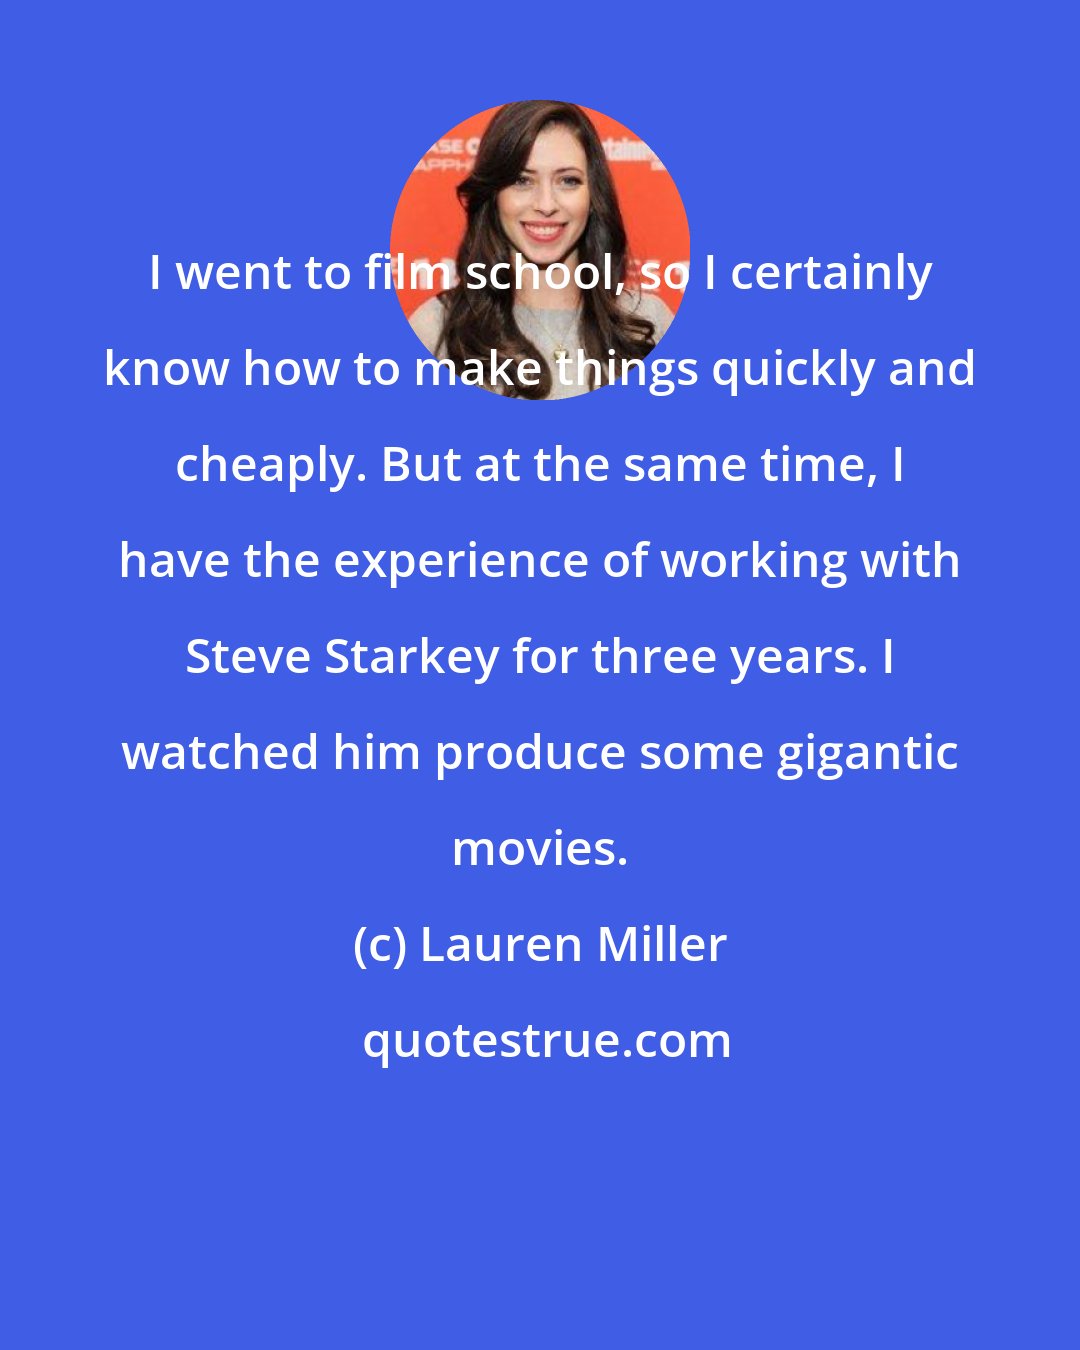 Lauren Miller: I went to film school, so I certainly know how to make things quickly and cheaply. But at the same time, I have the experience of working with Steve Starkey for three years. I watched him produce some gigantic movies.